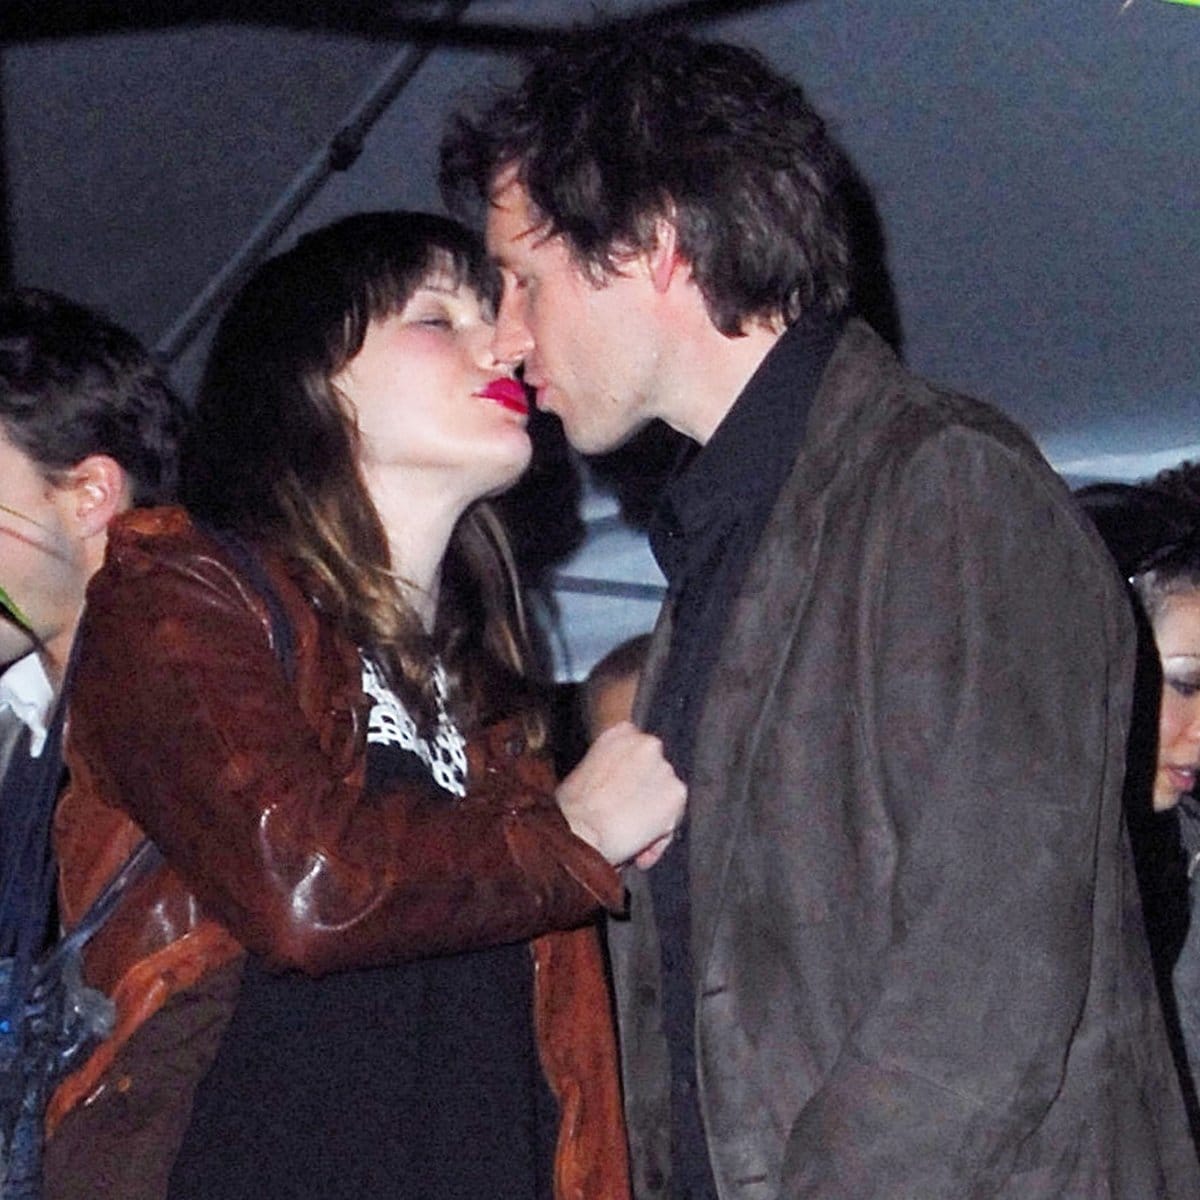 Milla Jovovich and her fiancé Paul W.S. Anderson celebrate her 32nd birthday